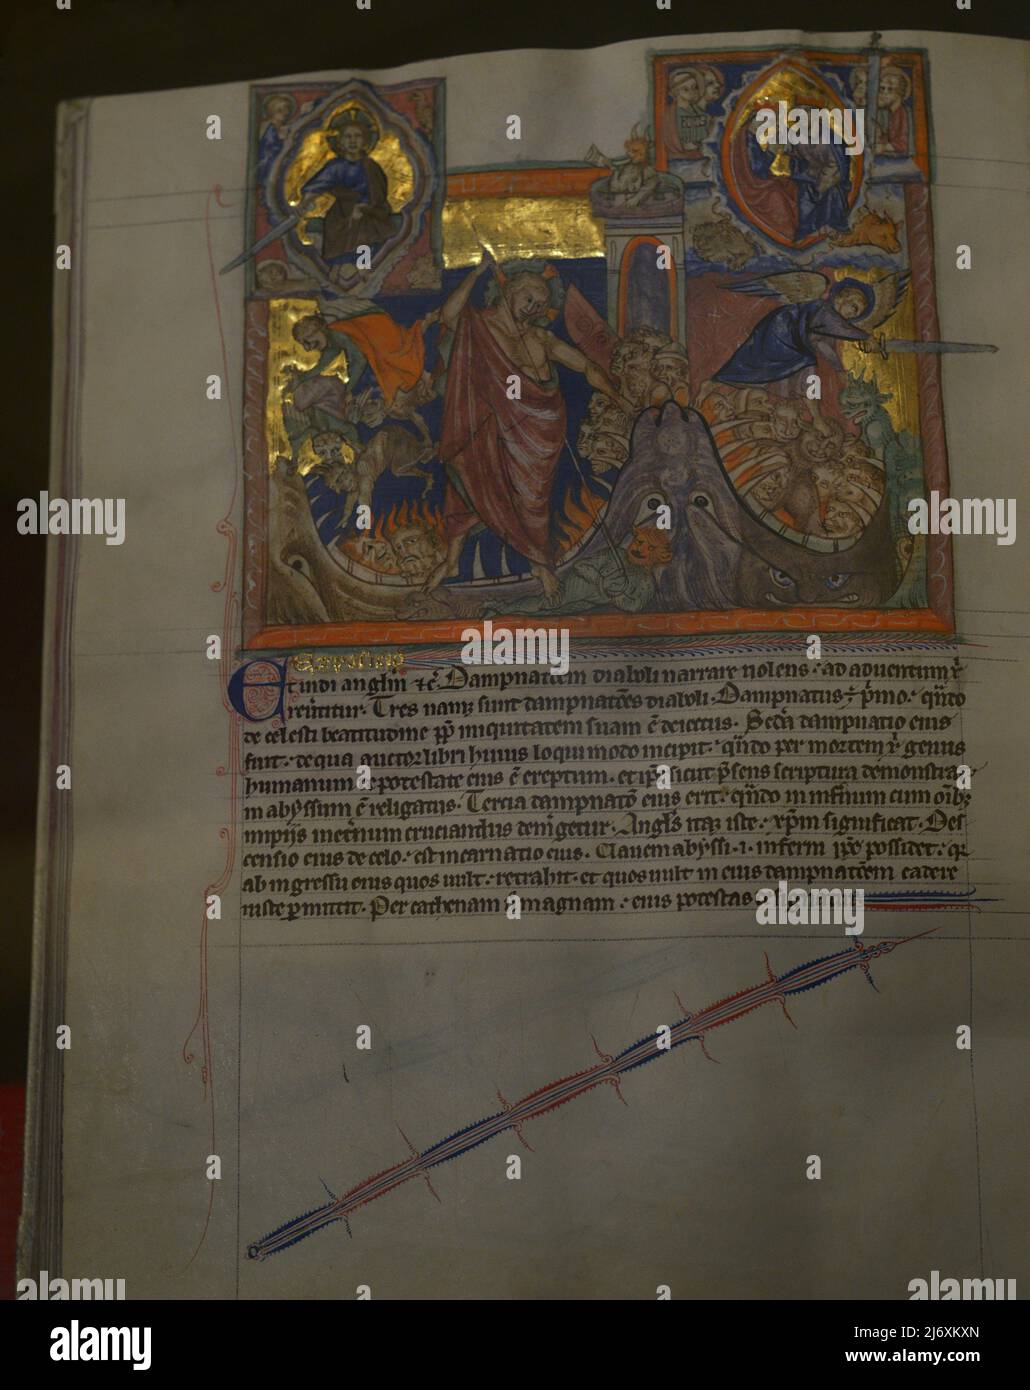 Apocalypse. With commentary of Berengaudus of Ferrière (840-892) and Haimo Autissiodorensis (Haimo of Auxerre) (dead ca. 865). London, Winchester or Salisbury (England), c. 1265-1275. Illuminators: collaborating artists from an English workshop. Manuscript on parchment. Fol. 68v. Miniature showing the three damnations of the Devil: the fall of the rebel angels, the harrowing of Hell and Satan is cast into the eternal torment of Hell. Calouste Gulbenkian Museum. Lisbon, Portugal. Stock Photo